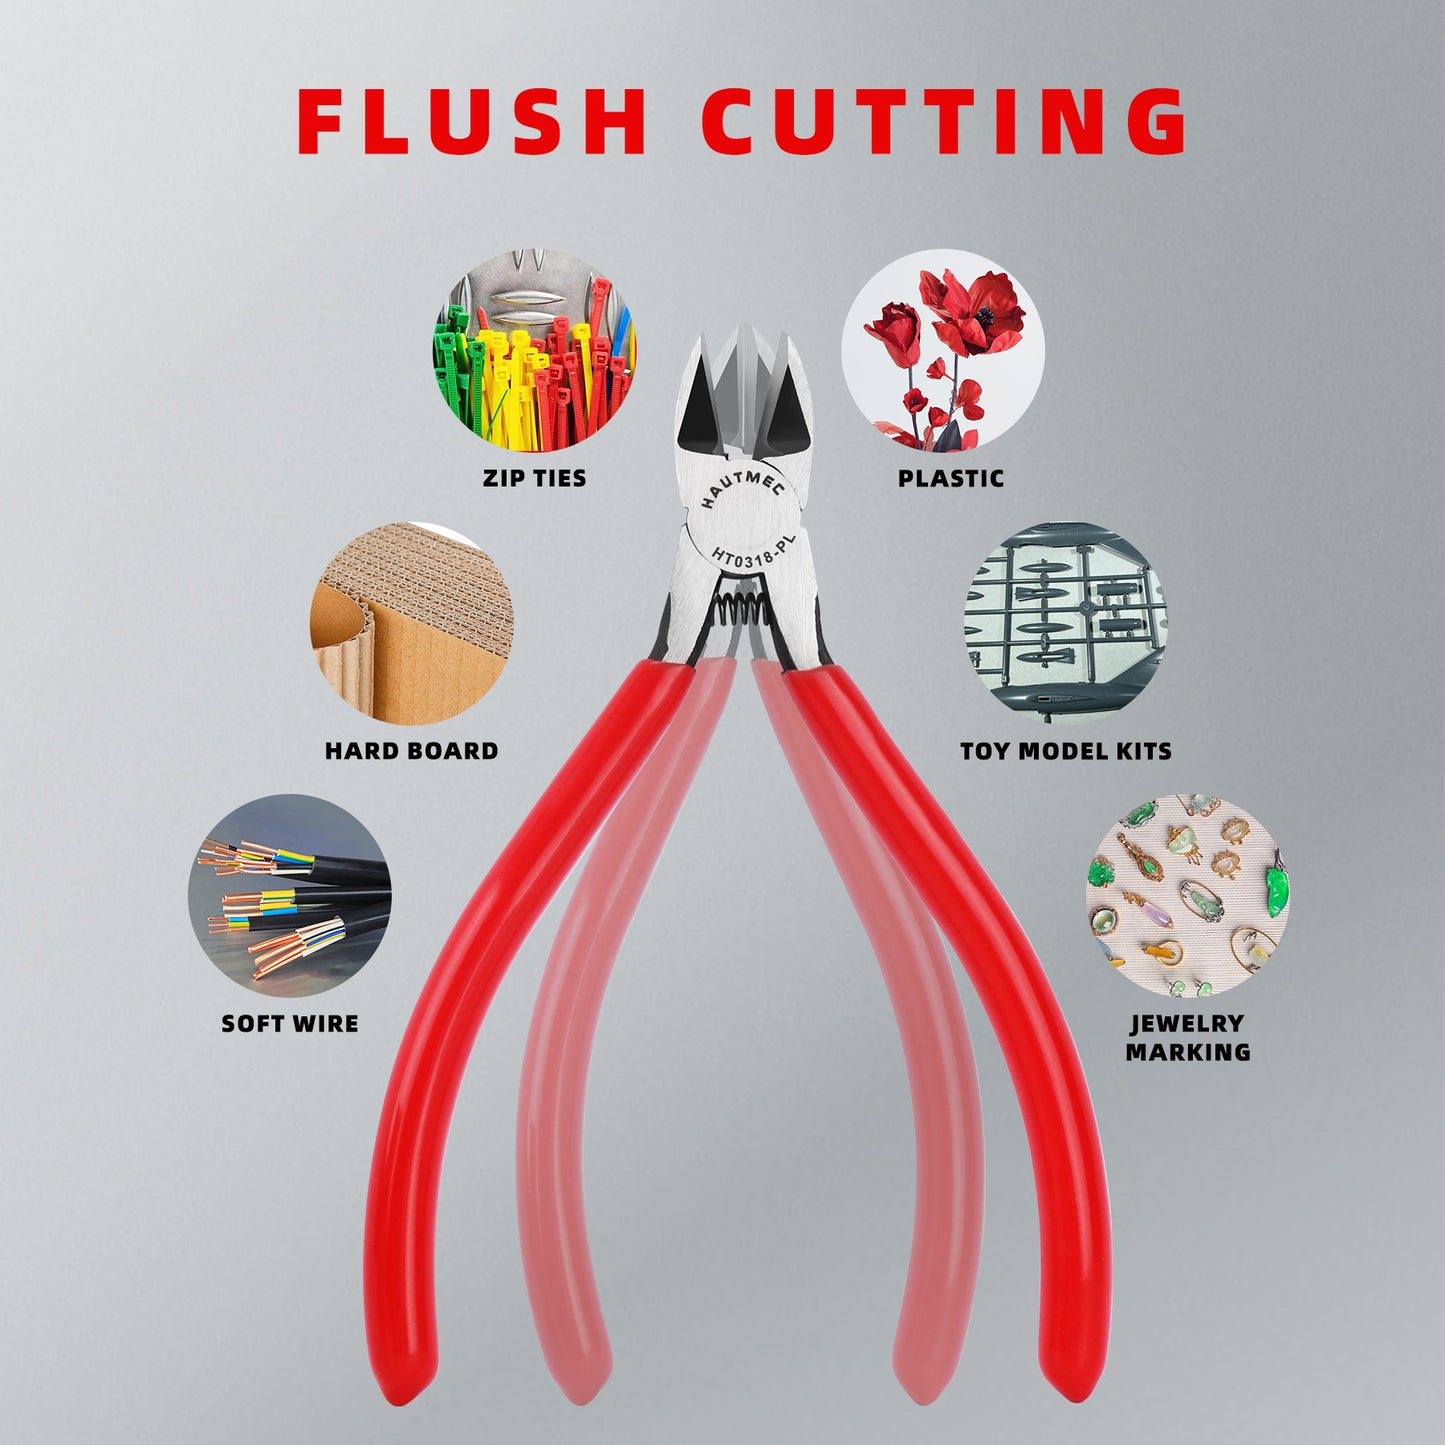 HAUTMEC 6" Flush Cut Pliers Ultra Sharp Wire Cutters 10PCS with Spring Loaded and Non-slip Grip, Ideal Wire Snips for Plastic, Soft Wire, Toy Model Kits, Jewelry Marking, Zip Ties, HT0318-10PC